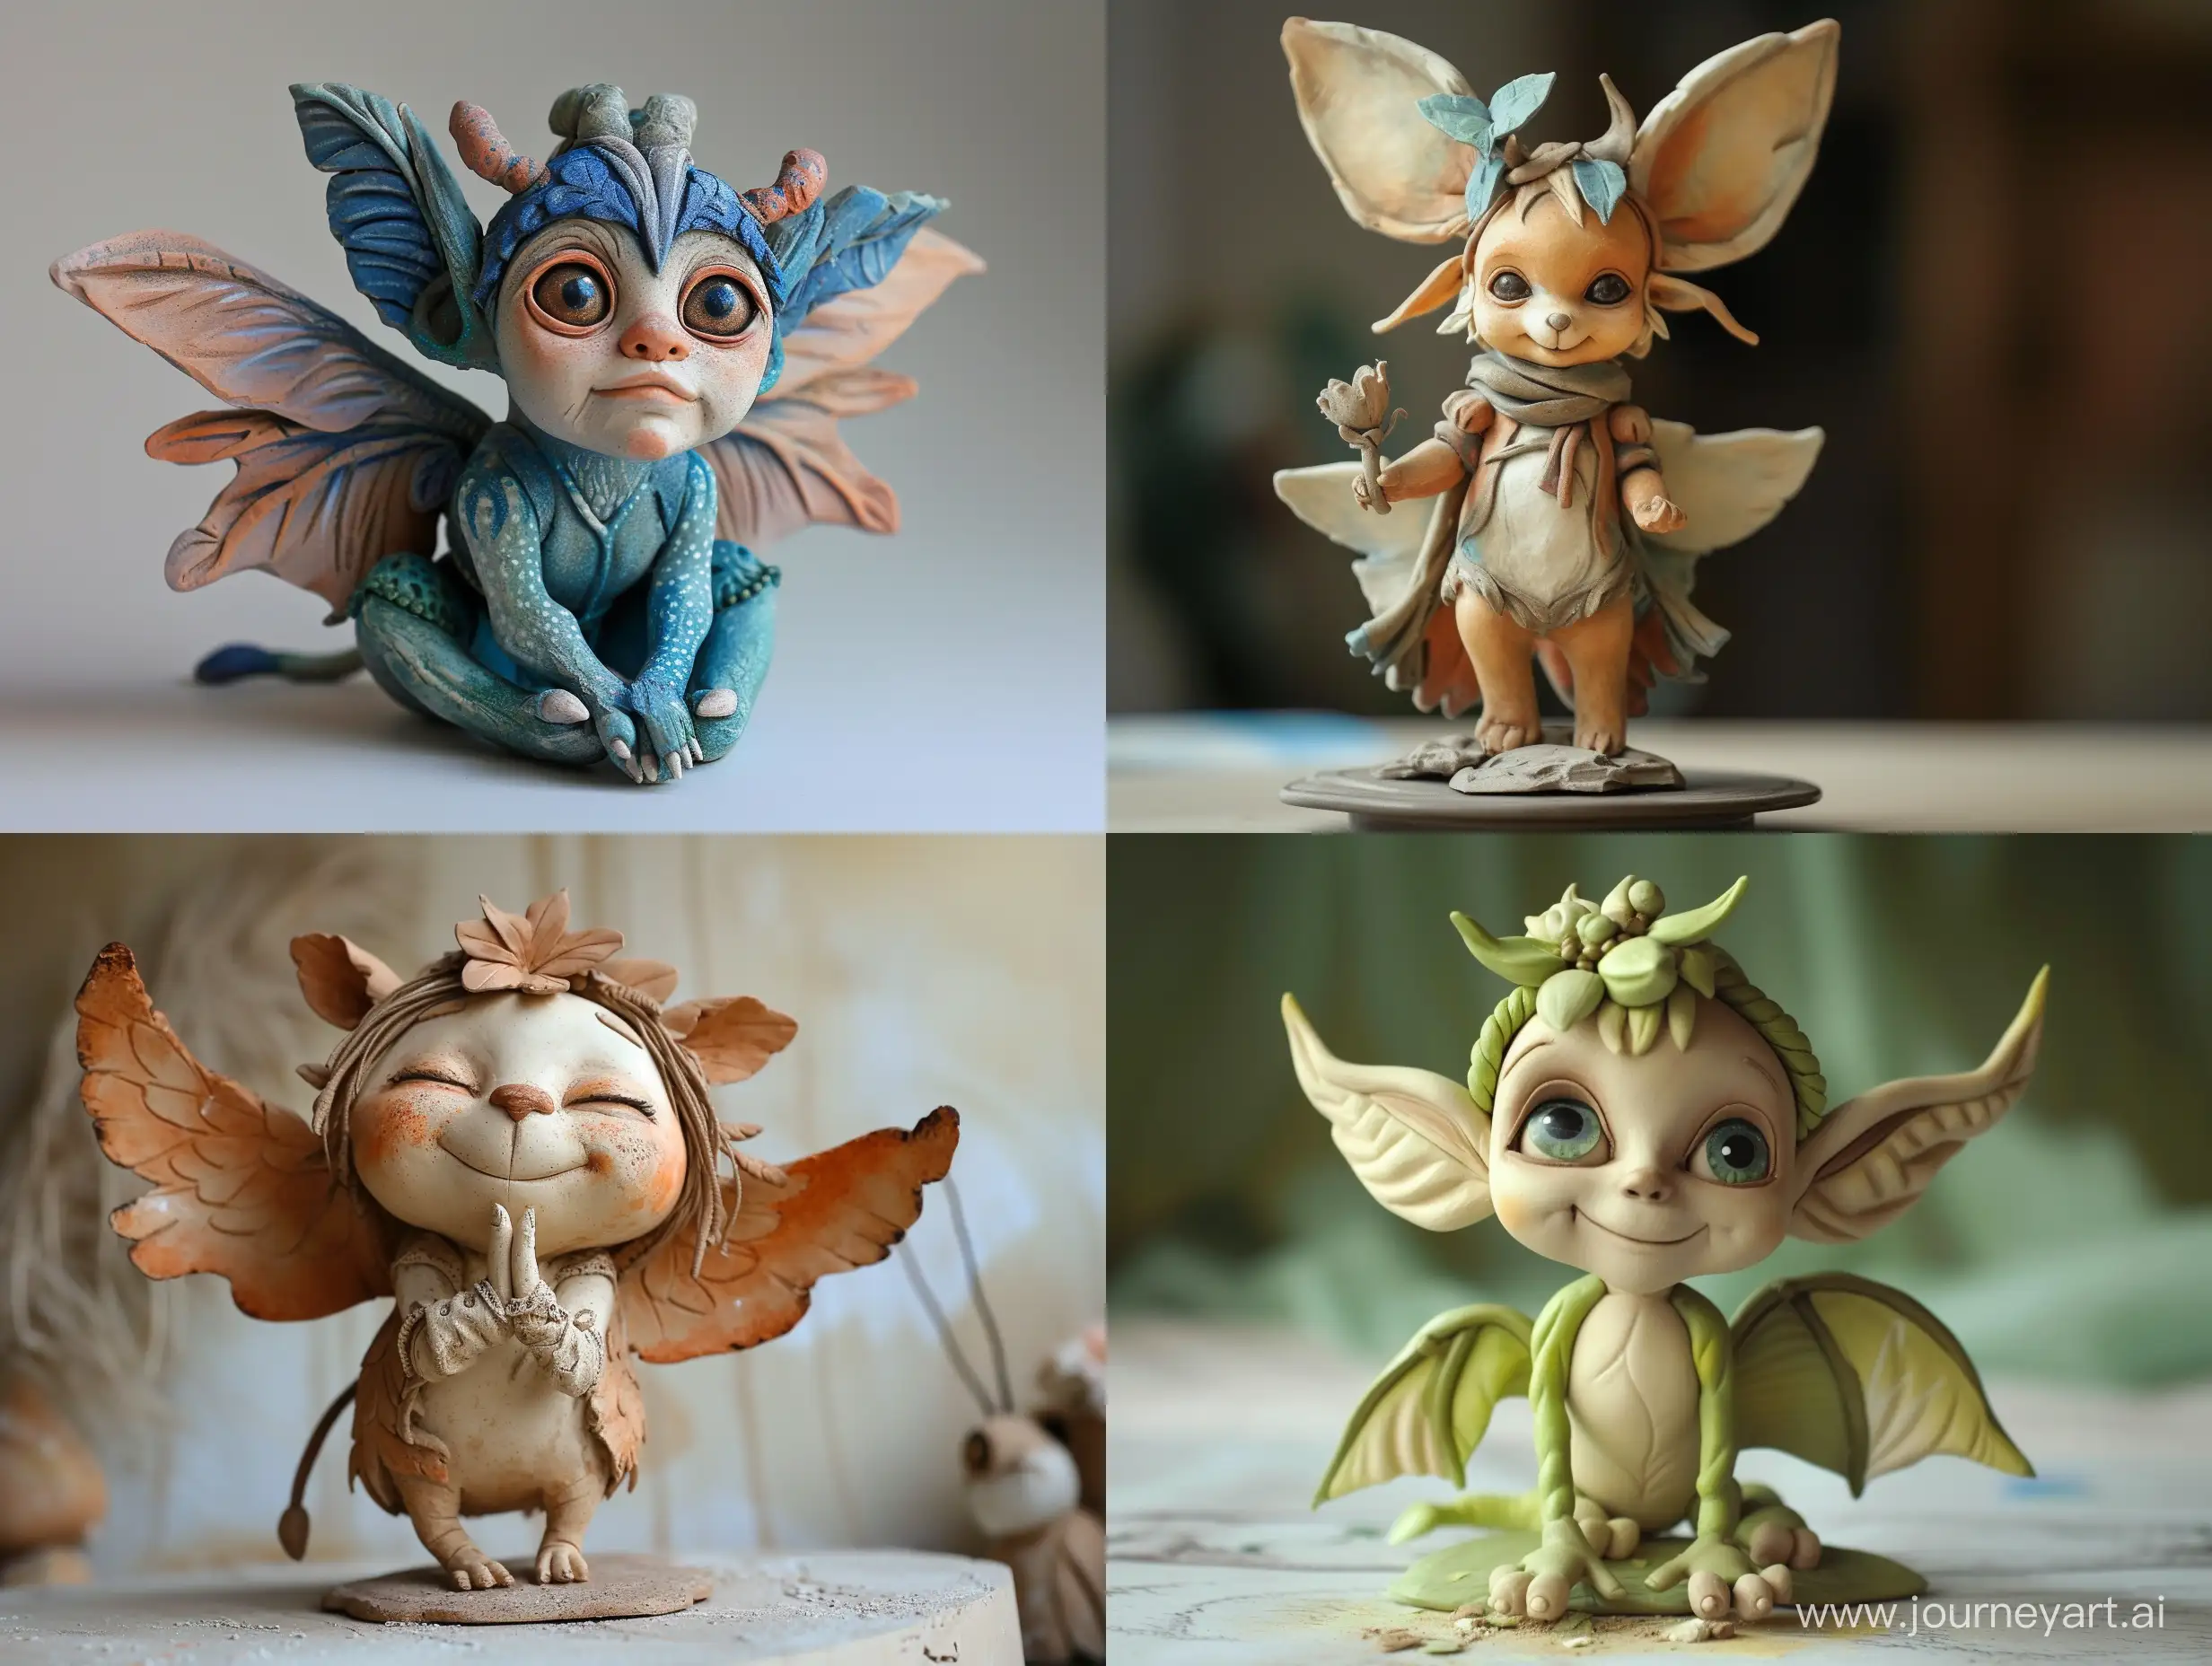 Charming-NonExistent-FairyTale-Statuette-of-a-Cute-Animal